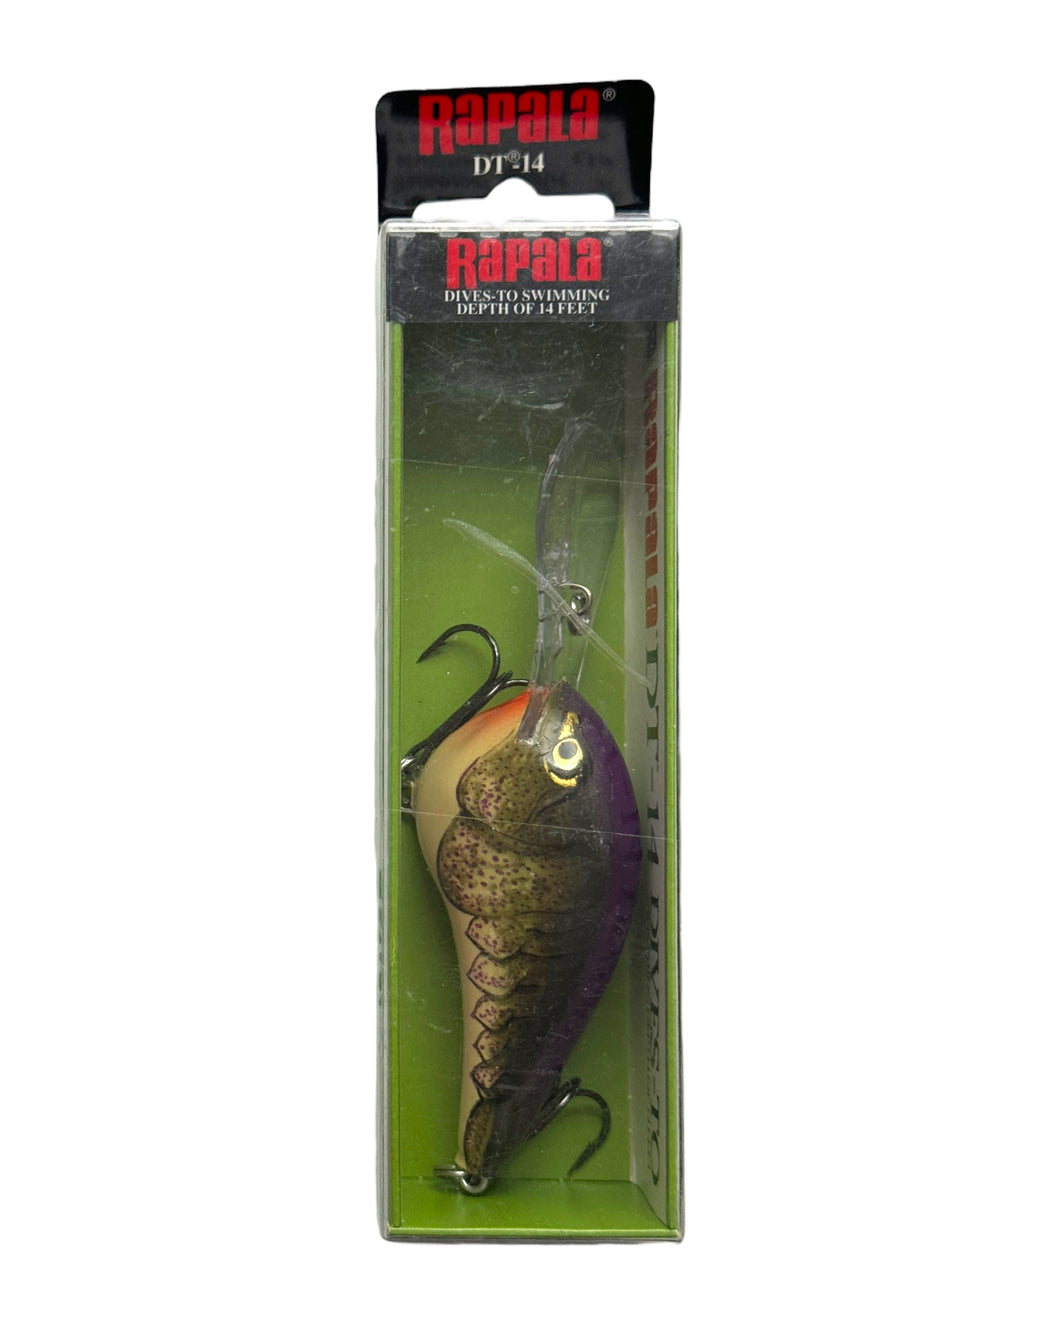 RAPALA LURES DT-14 Fishing Lure in PURPLE OLIVE CRAW